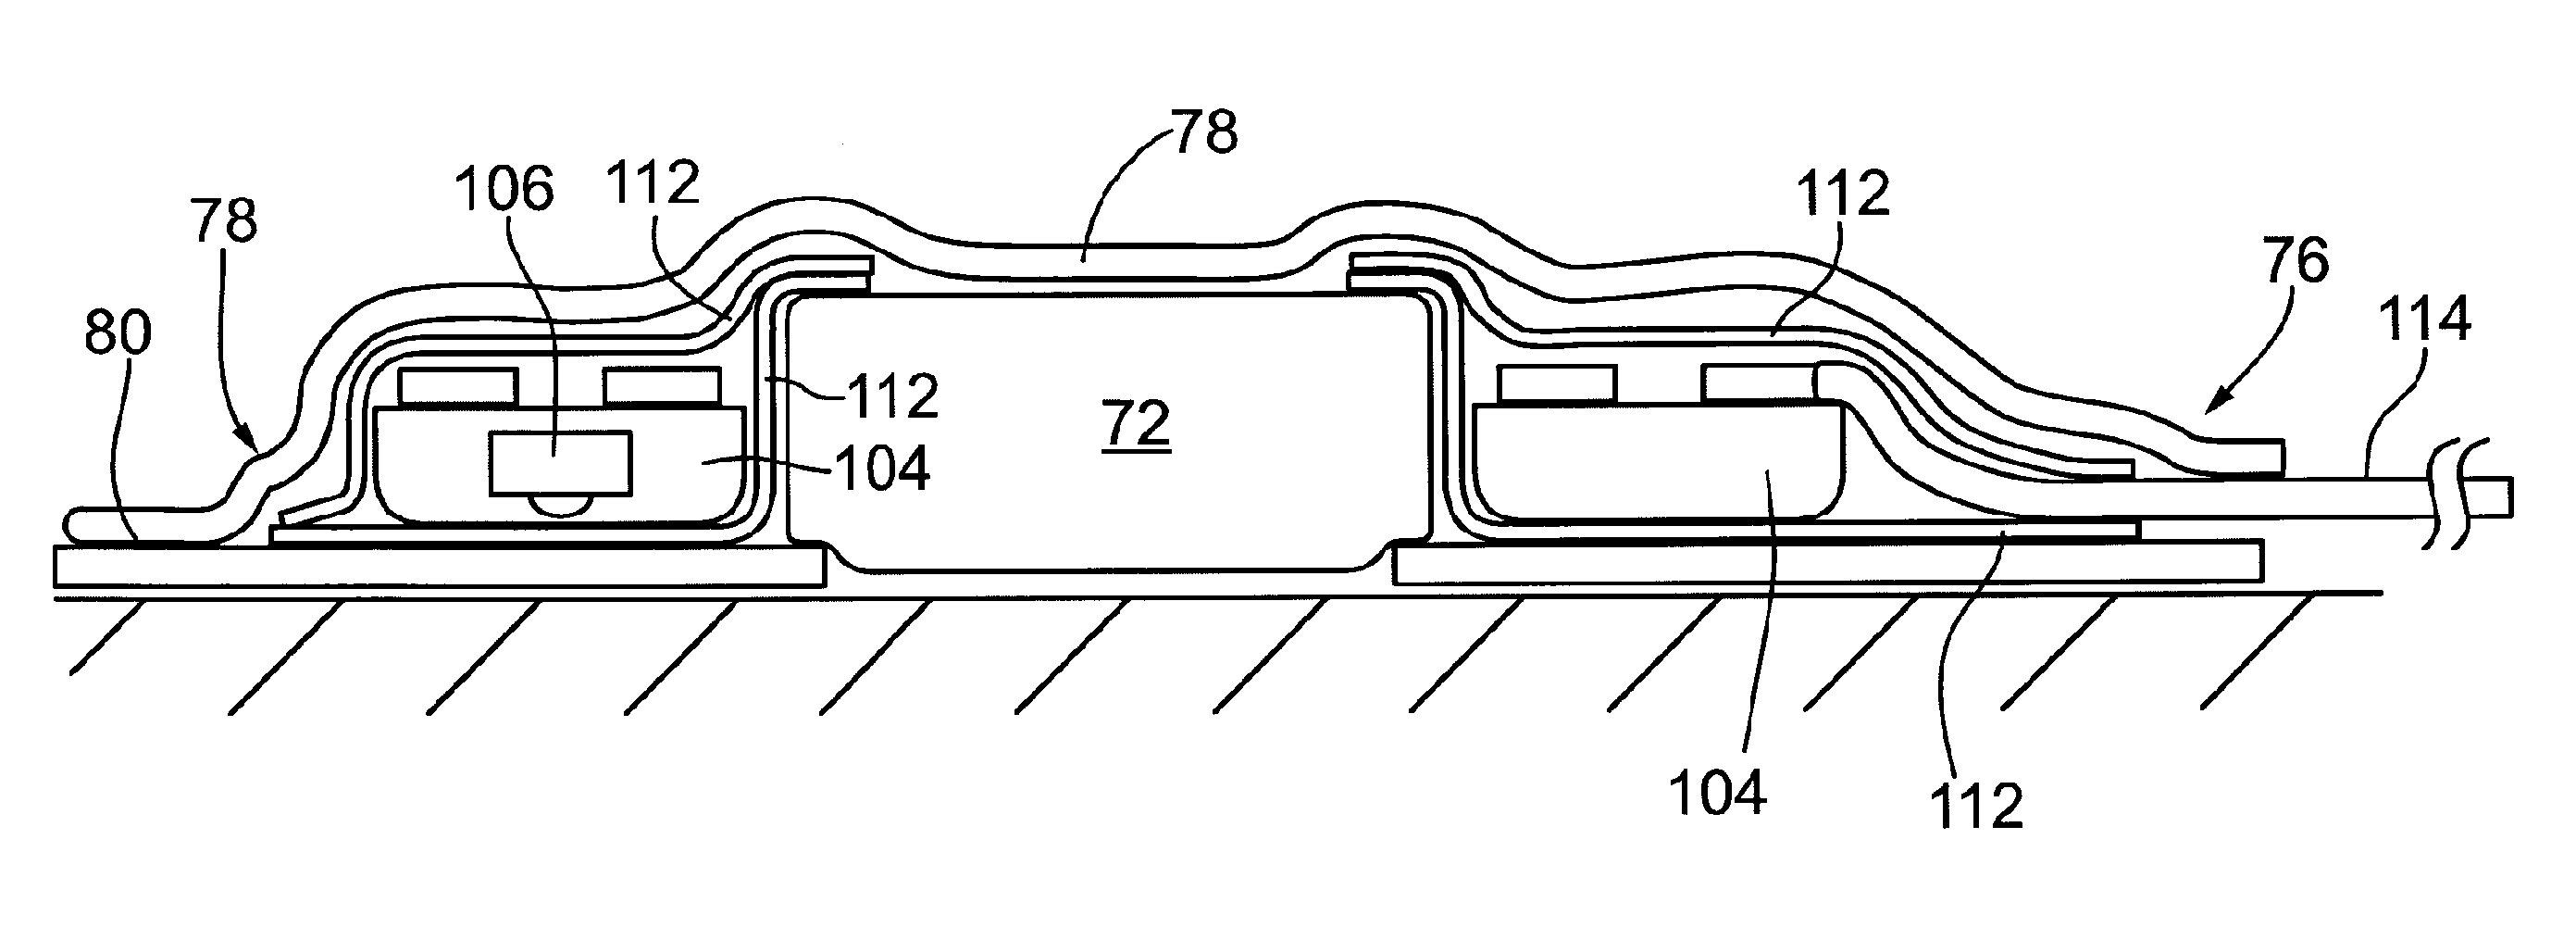 Phototherapy device for illuminating the periphery of a wound and phototherapy system incorporating the same